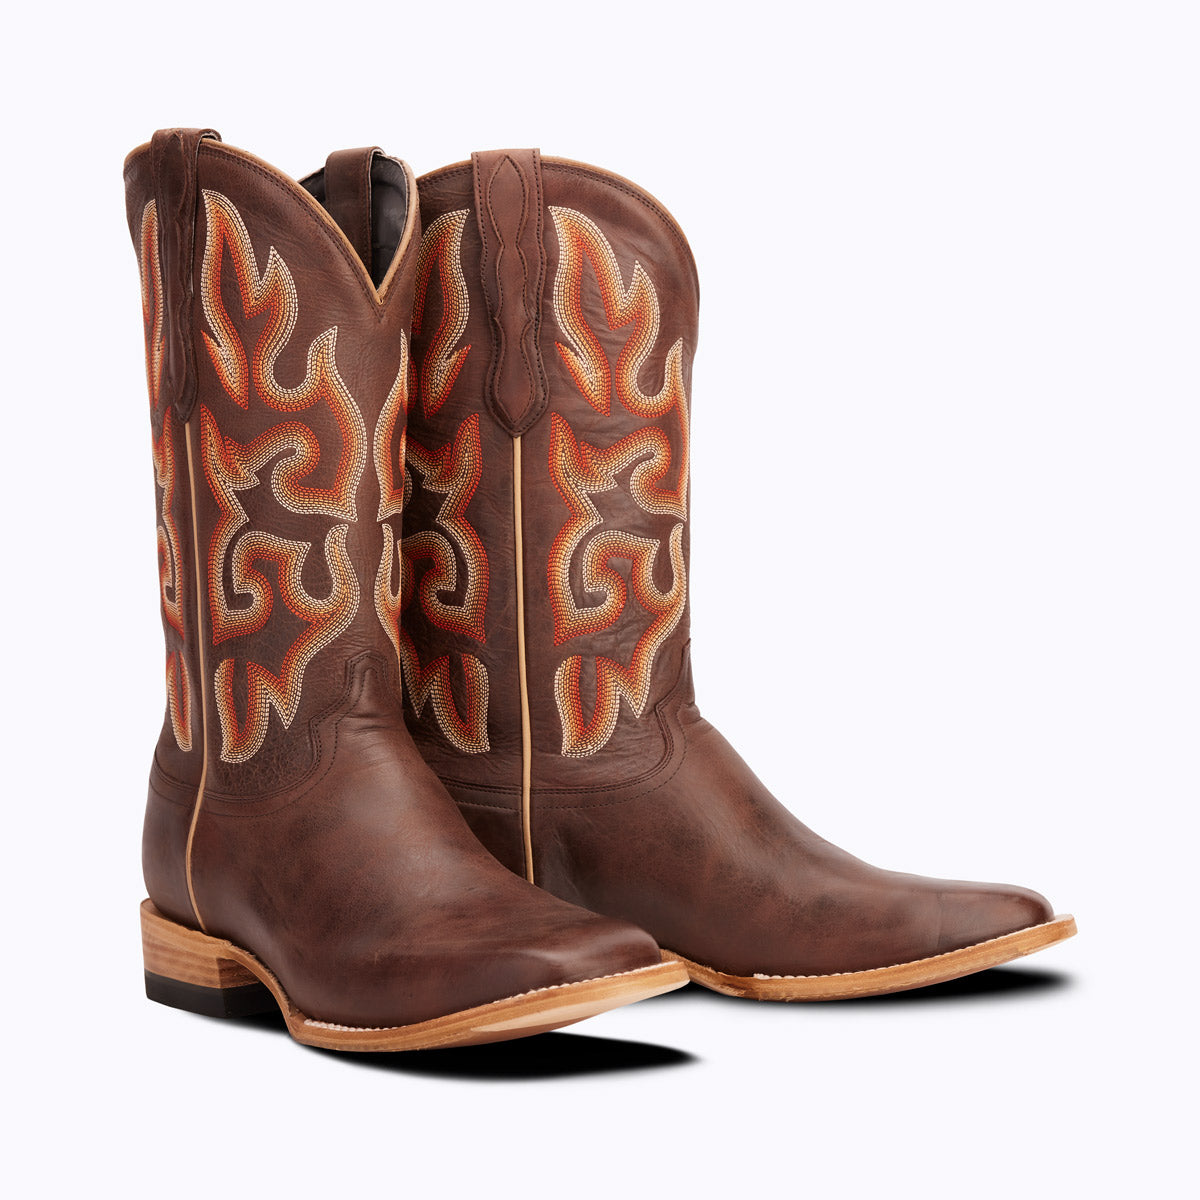 Ft Worth Mens Western Boot - Capitan Boots